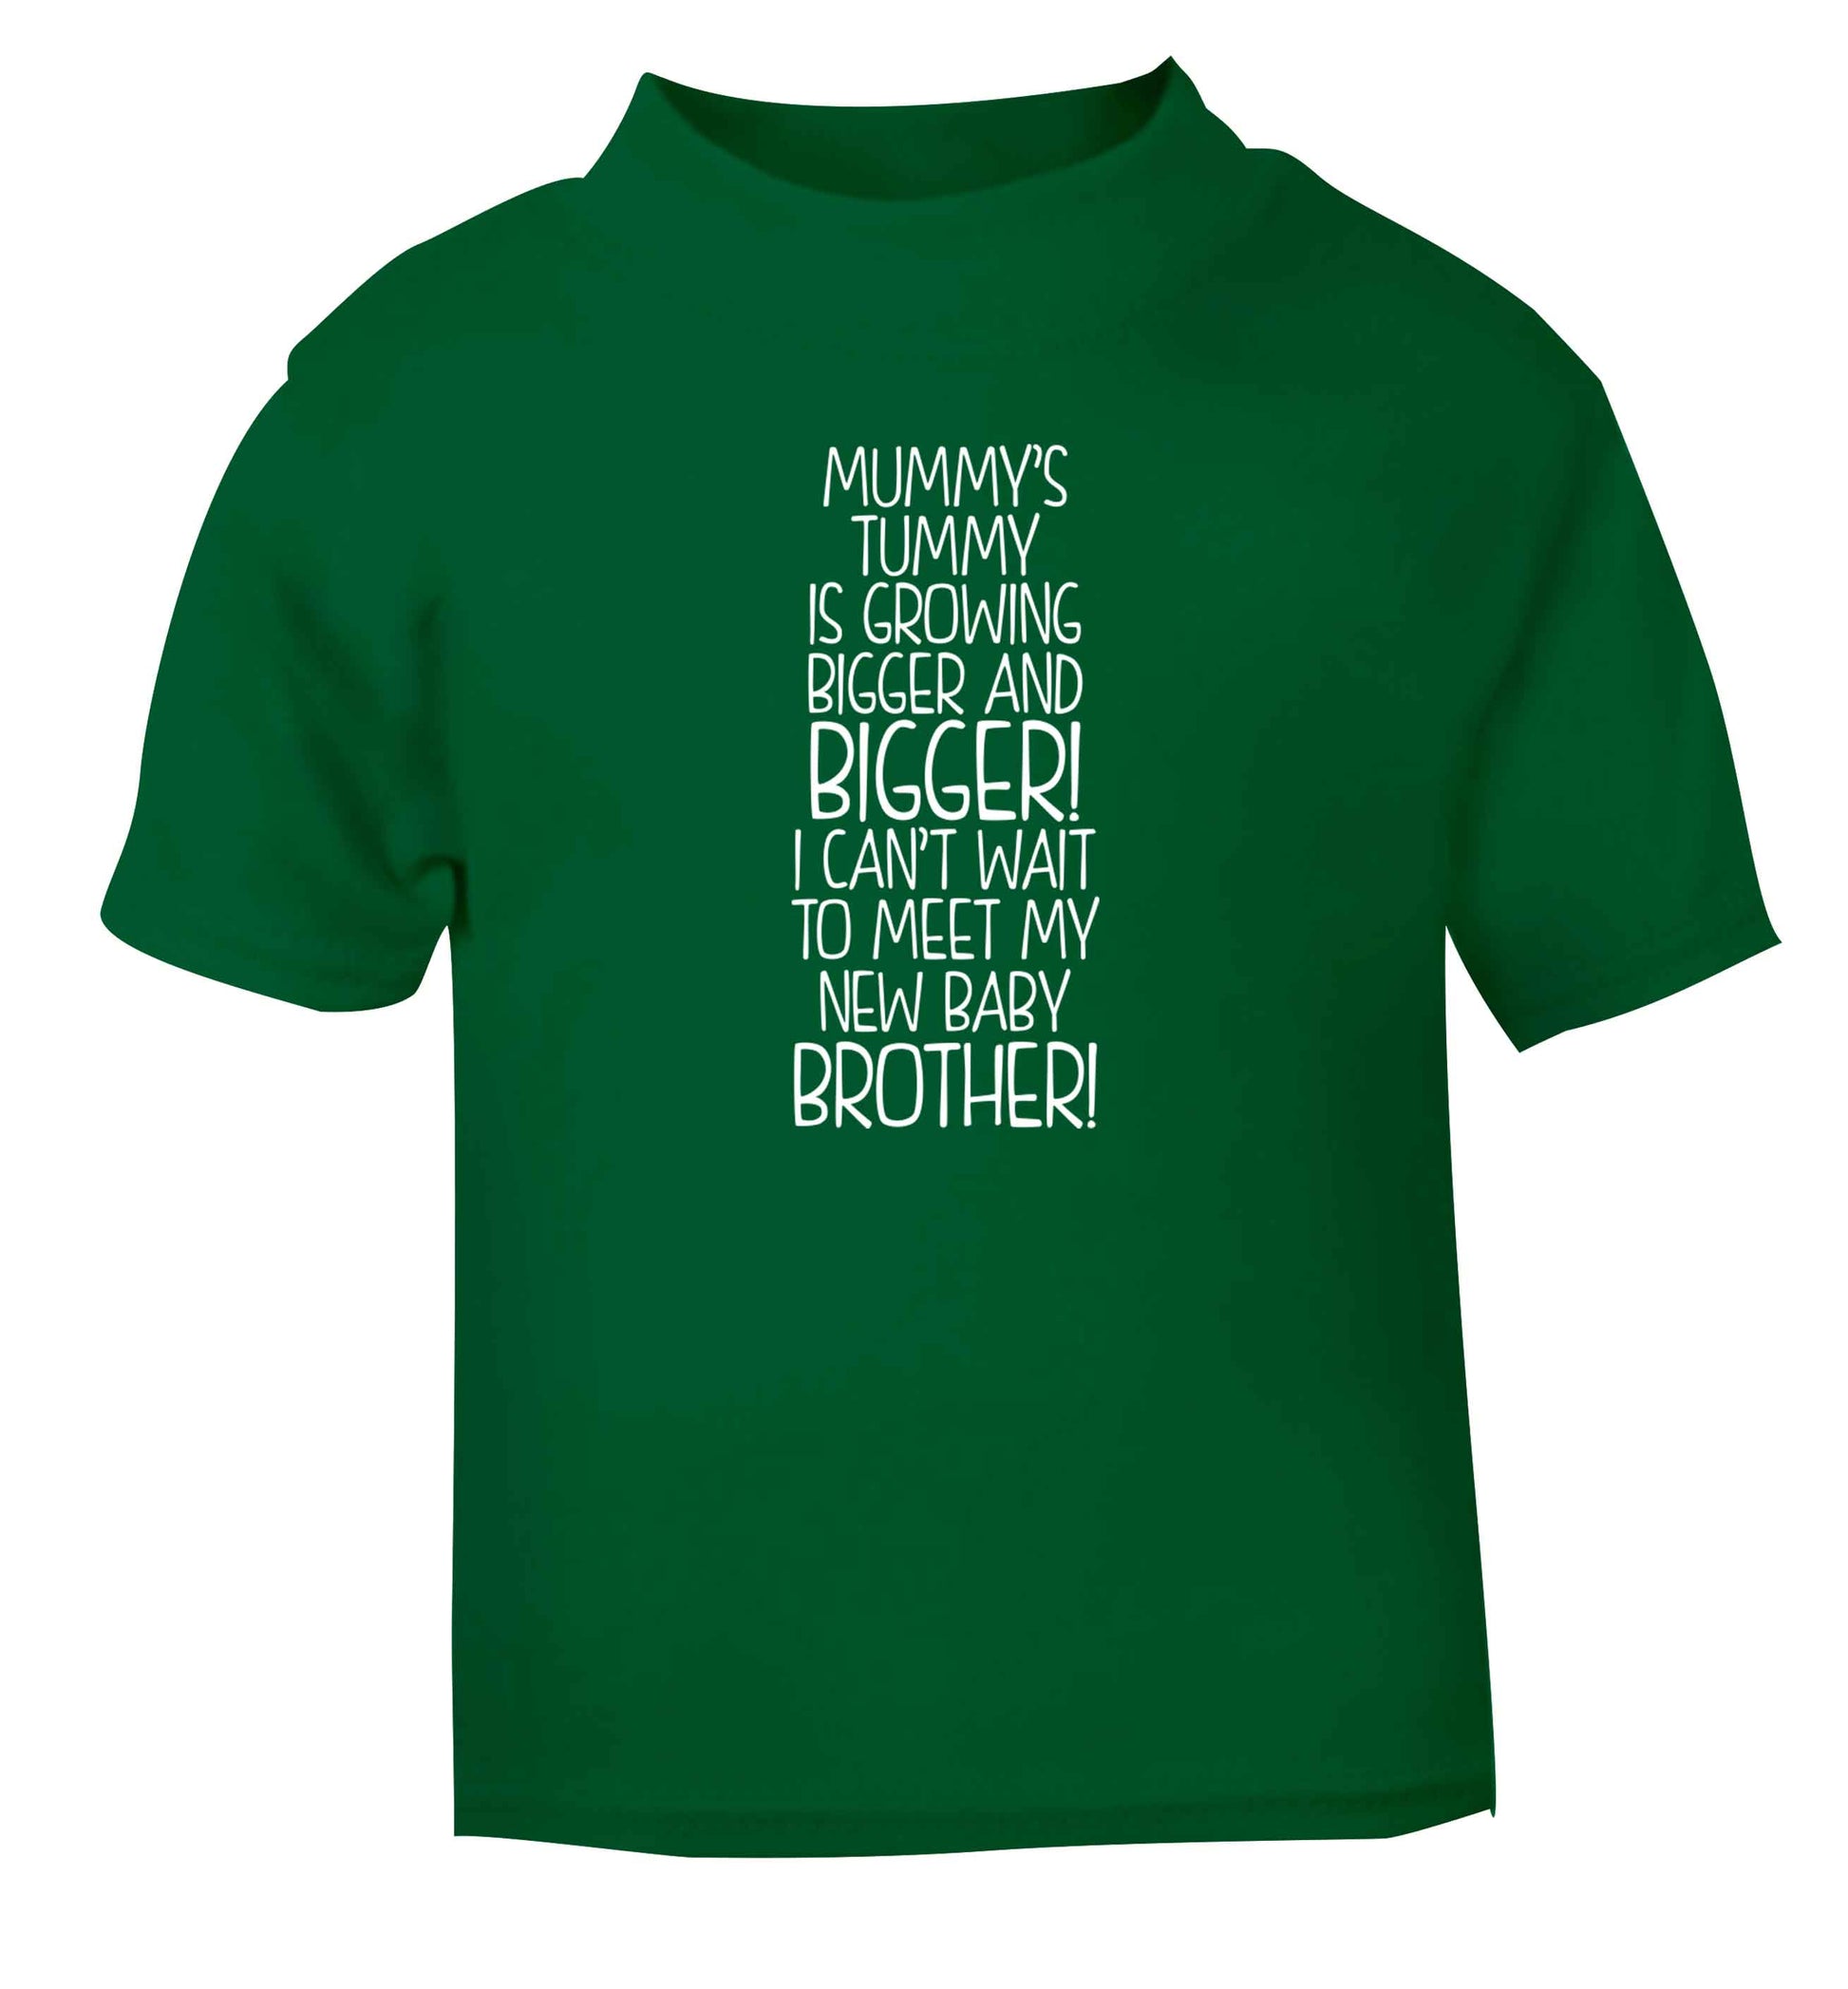 Mummy's tummy is growing bigger and bigger I can't wait to meet my new baby brother! green Baby Toddler Tshirt 2 Years